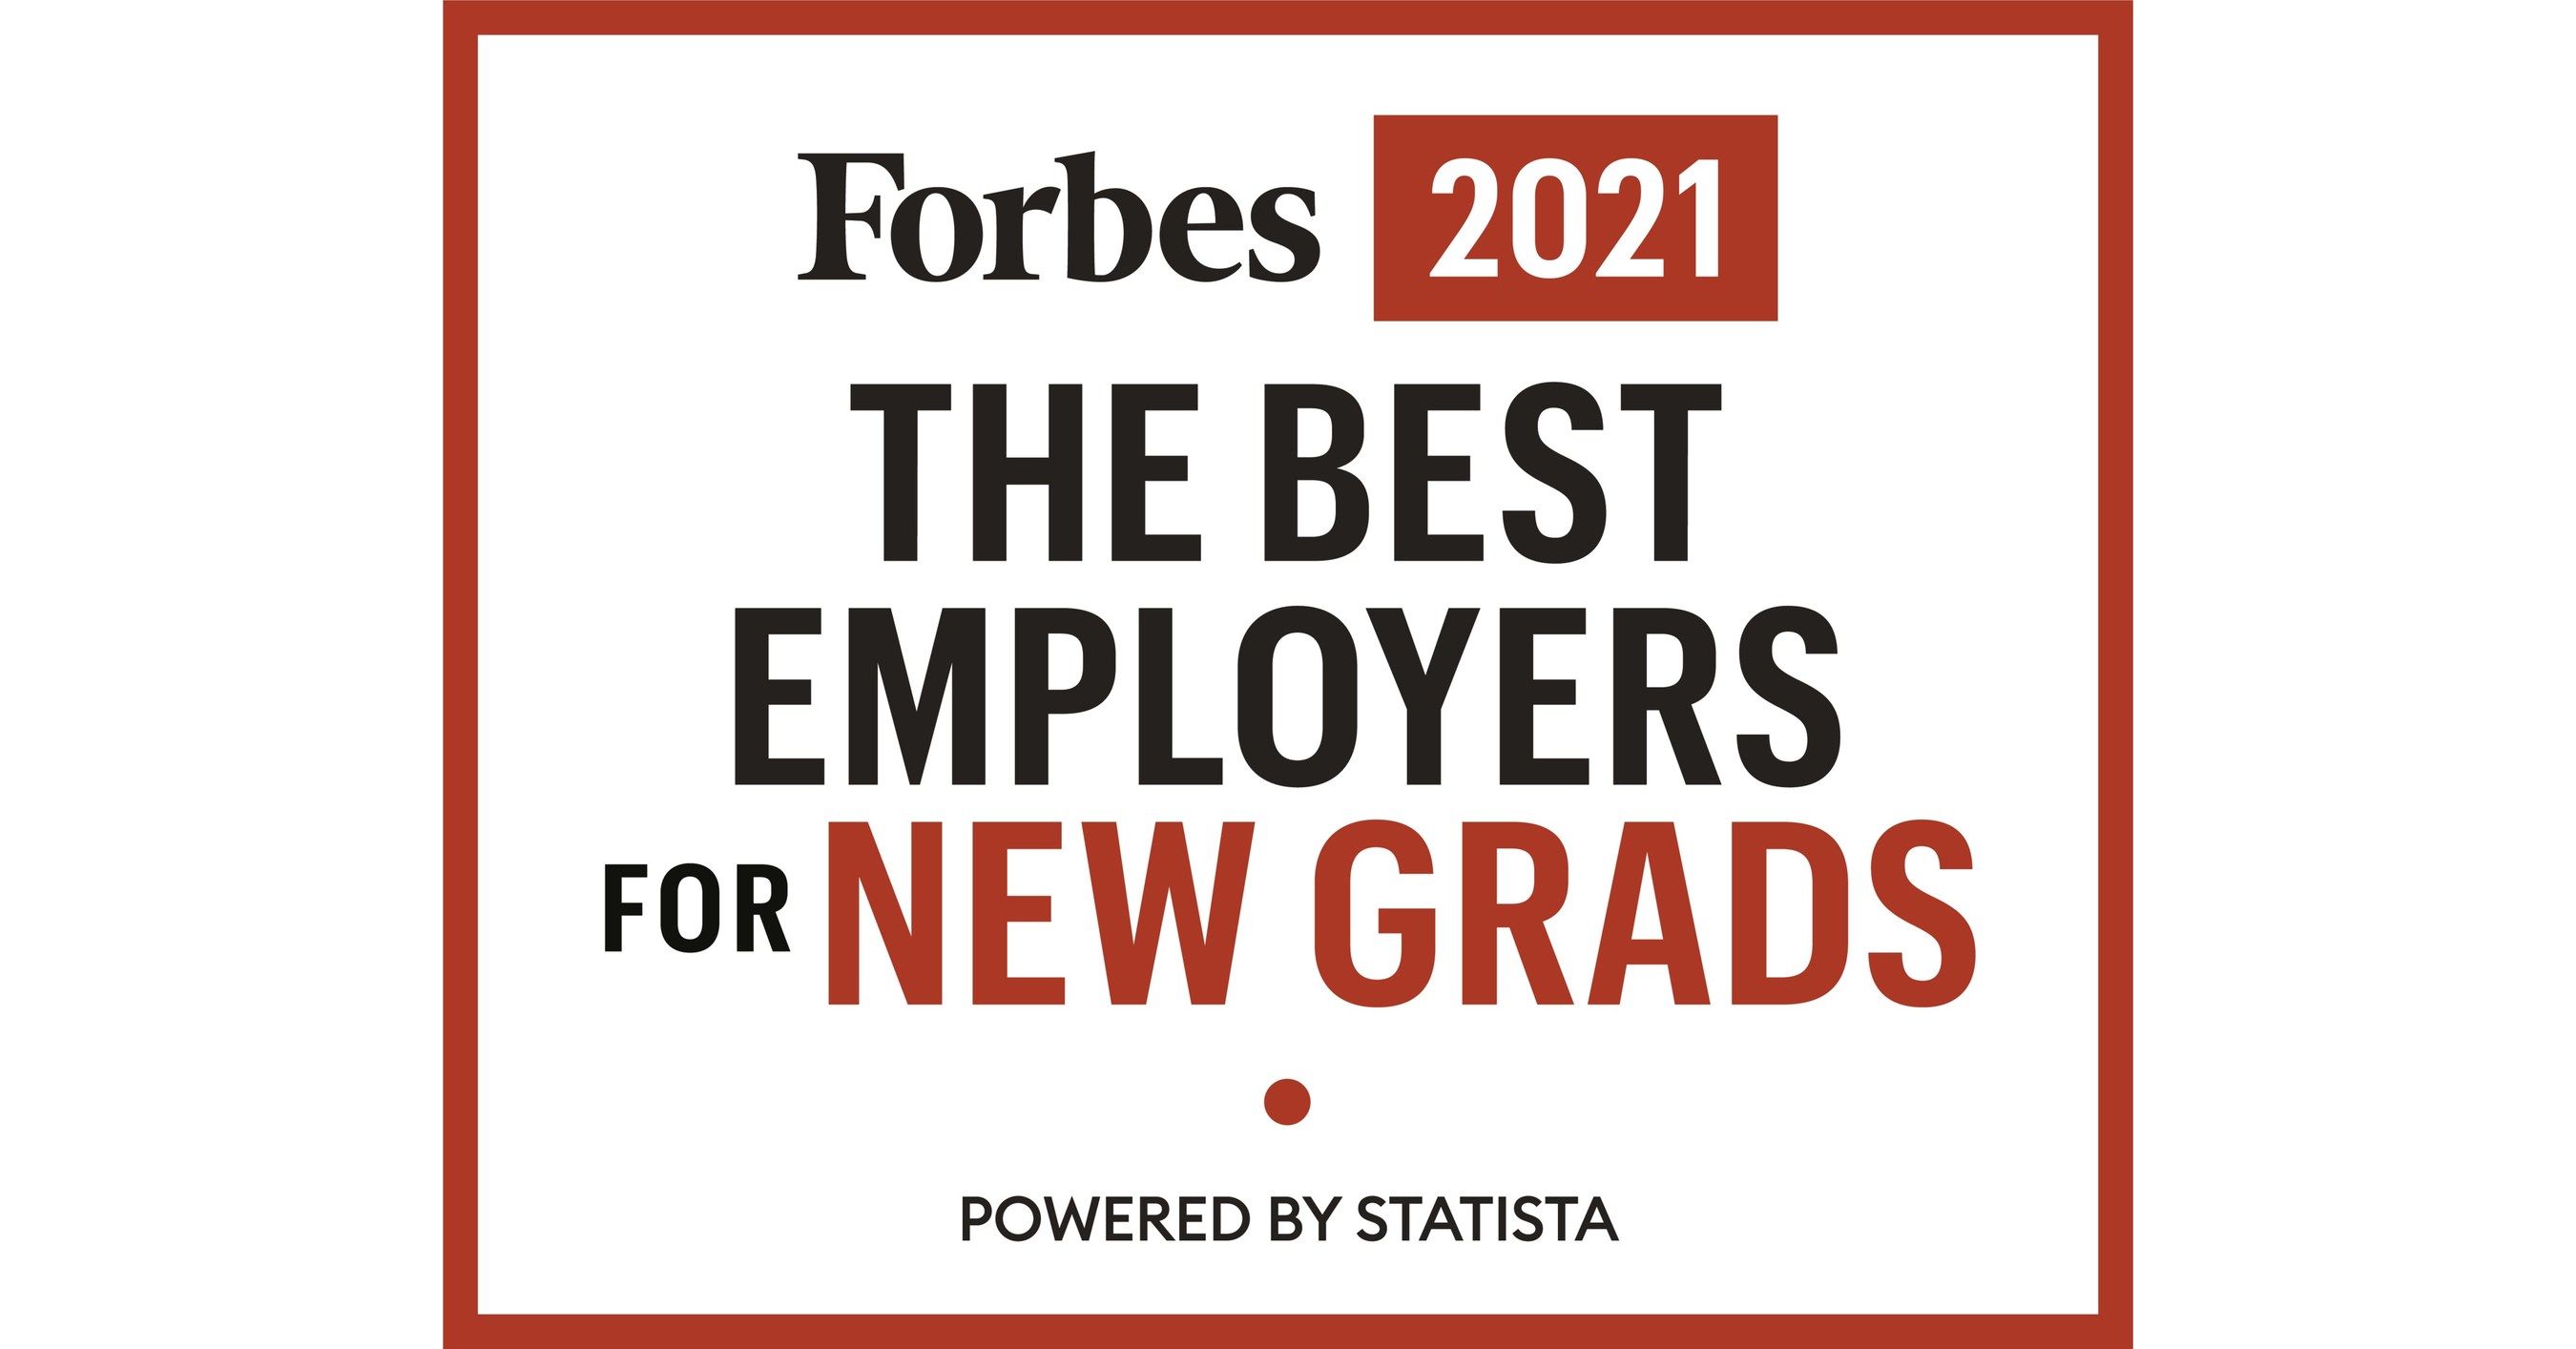 Help at Home Recognized on Forbes' 2021 Best Employers for New Grads List